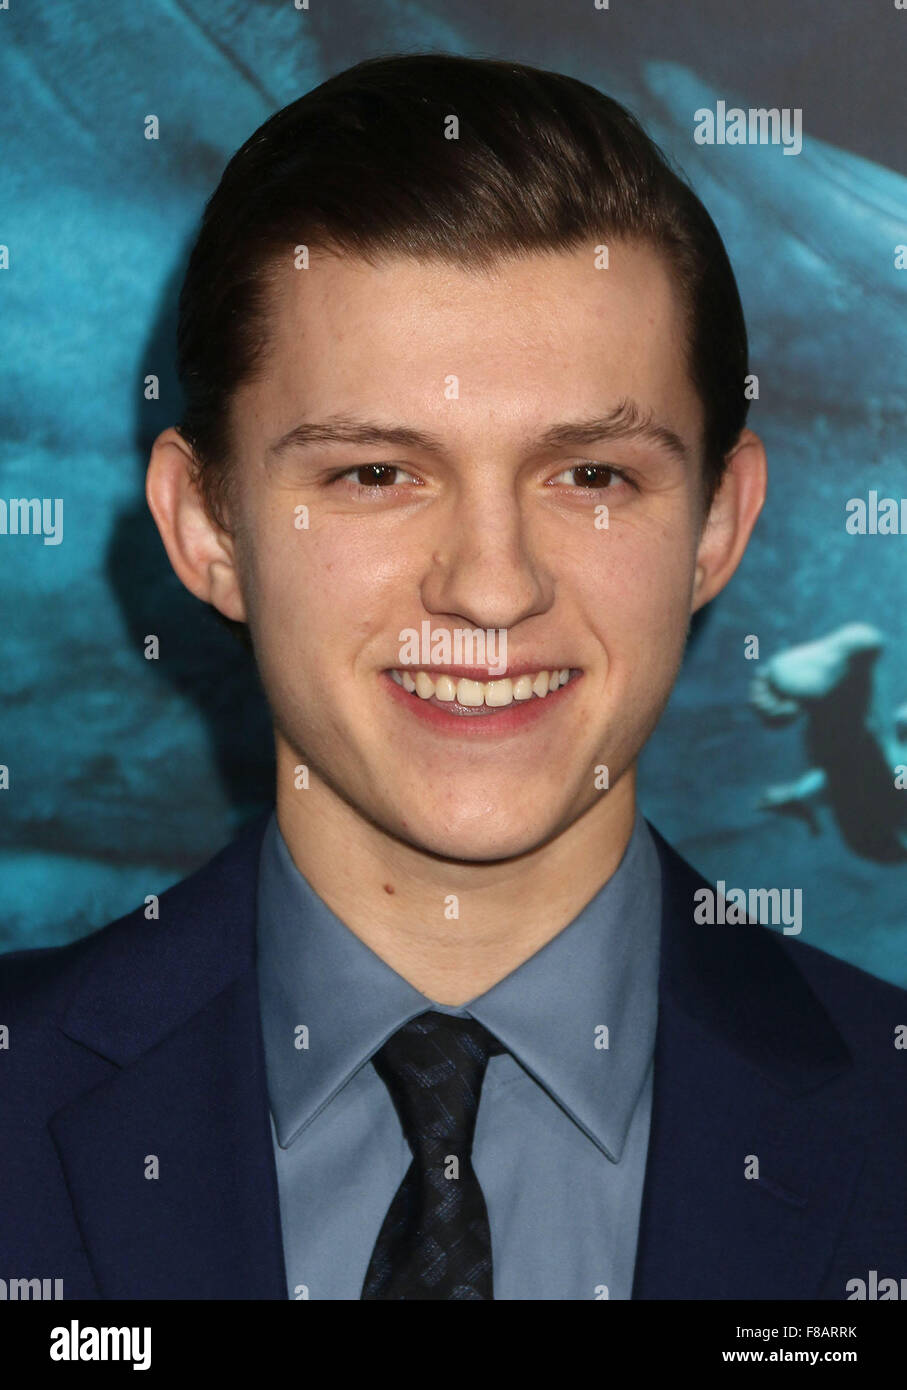 New York, New York, USA. 7th Dec, 2015. Actor TOM HOLLAND attends the New York premiere of 'In the Heart of the Sea' held at Jazz at Lincoln Center's Frederick P. Rose Hall. Credit:  Nancy Kaszerman/ZUMA Wire/Alamy Live News Stock Photo